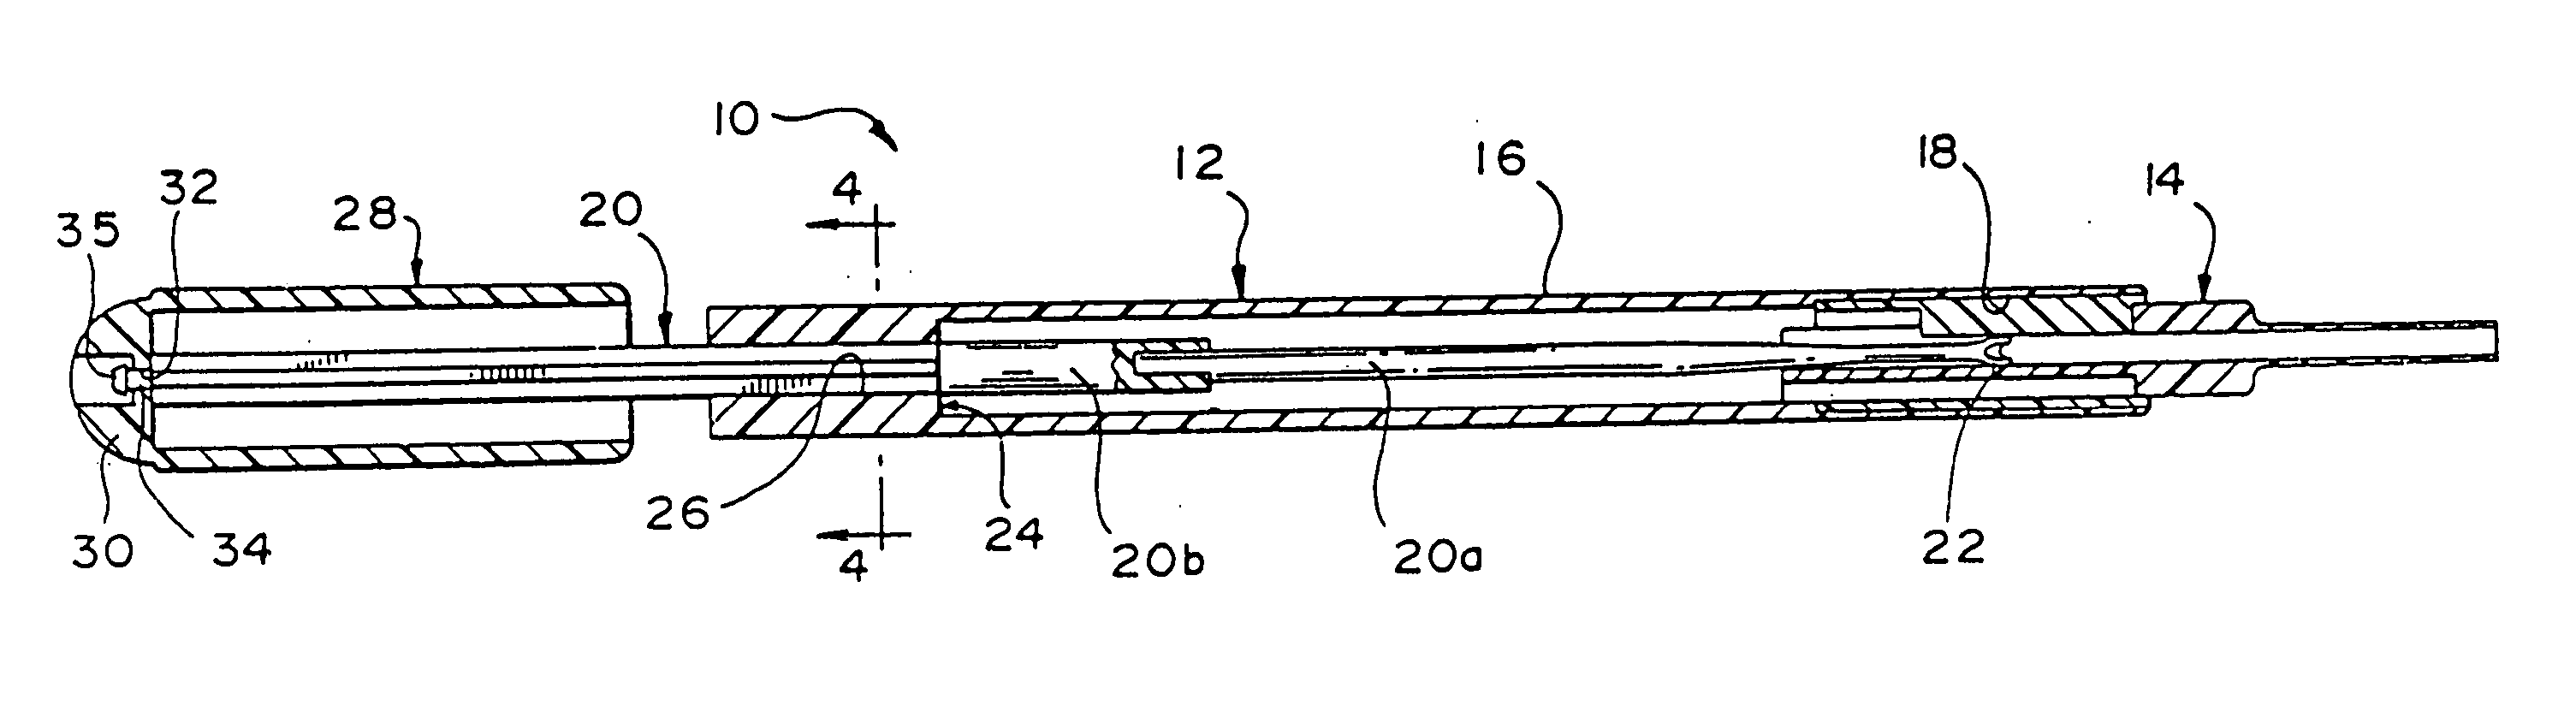 Disposable intraocular lens insertion system